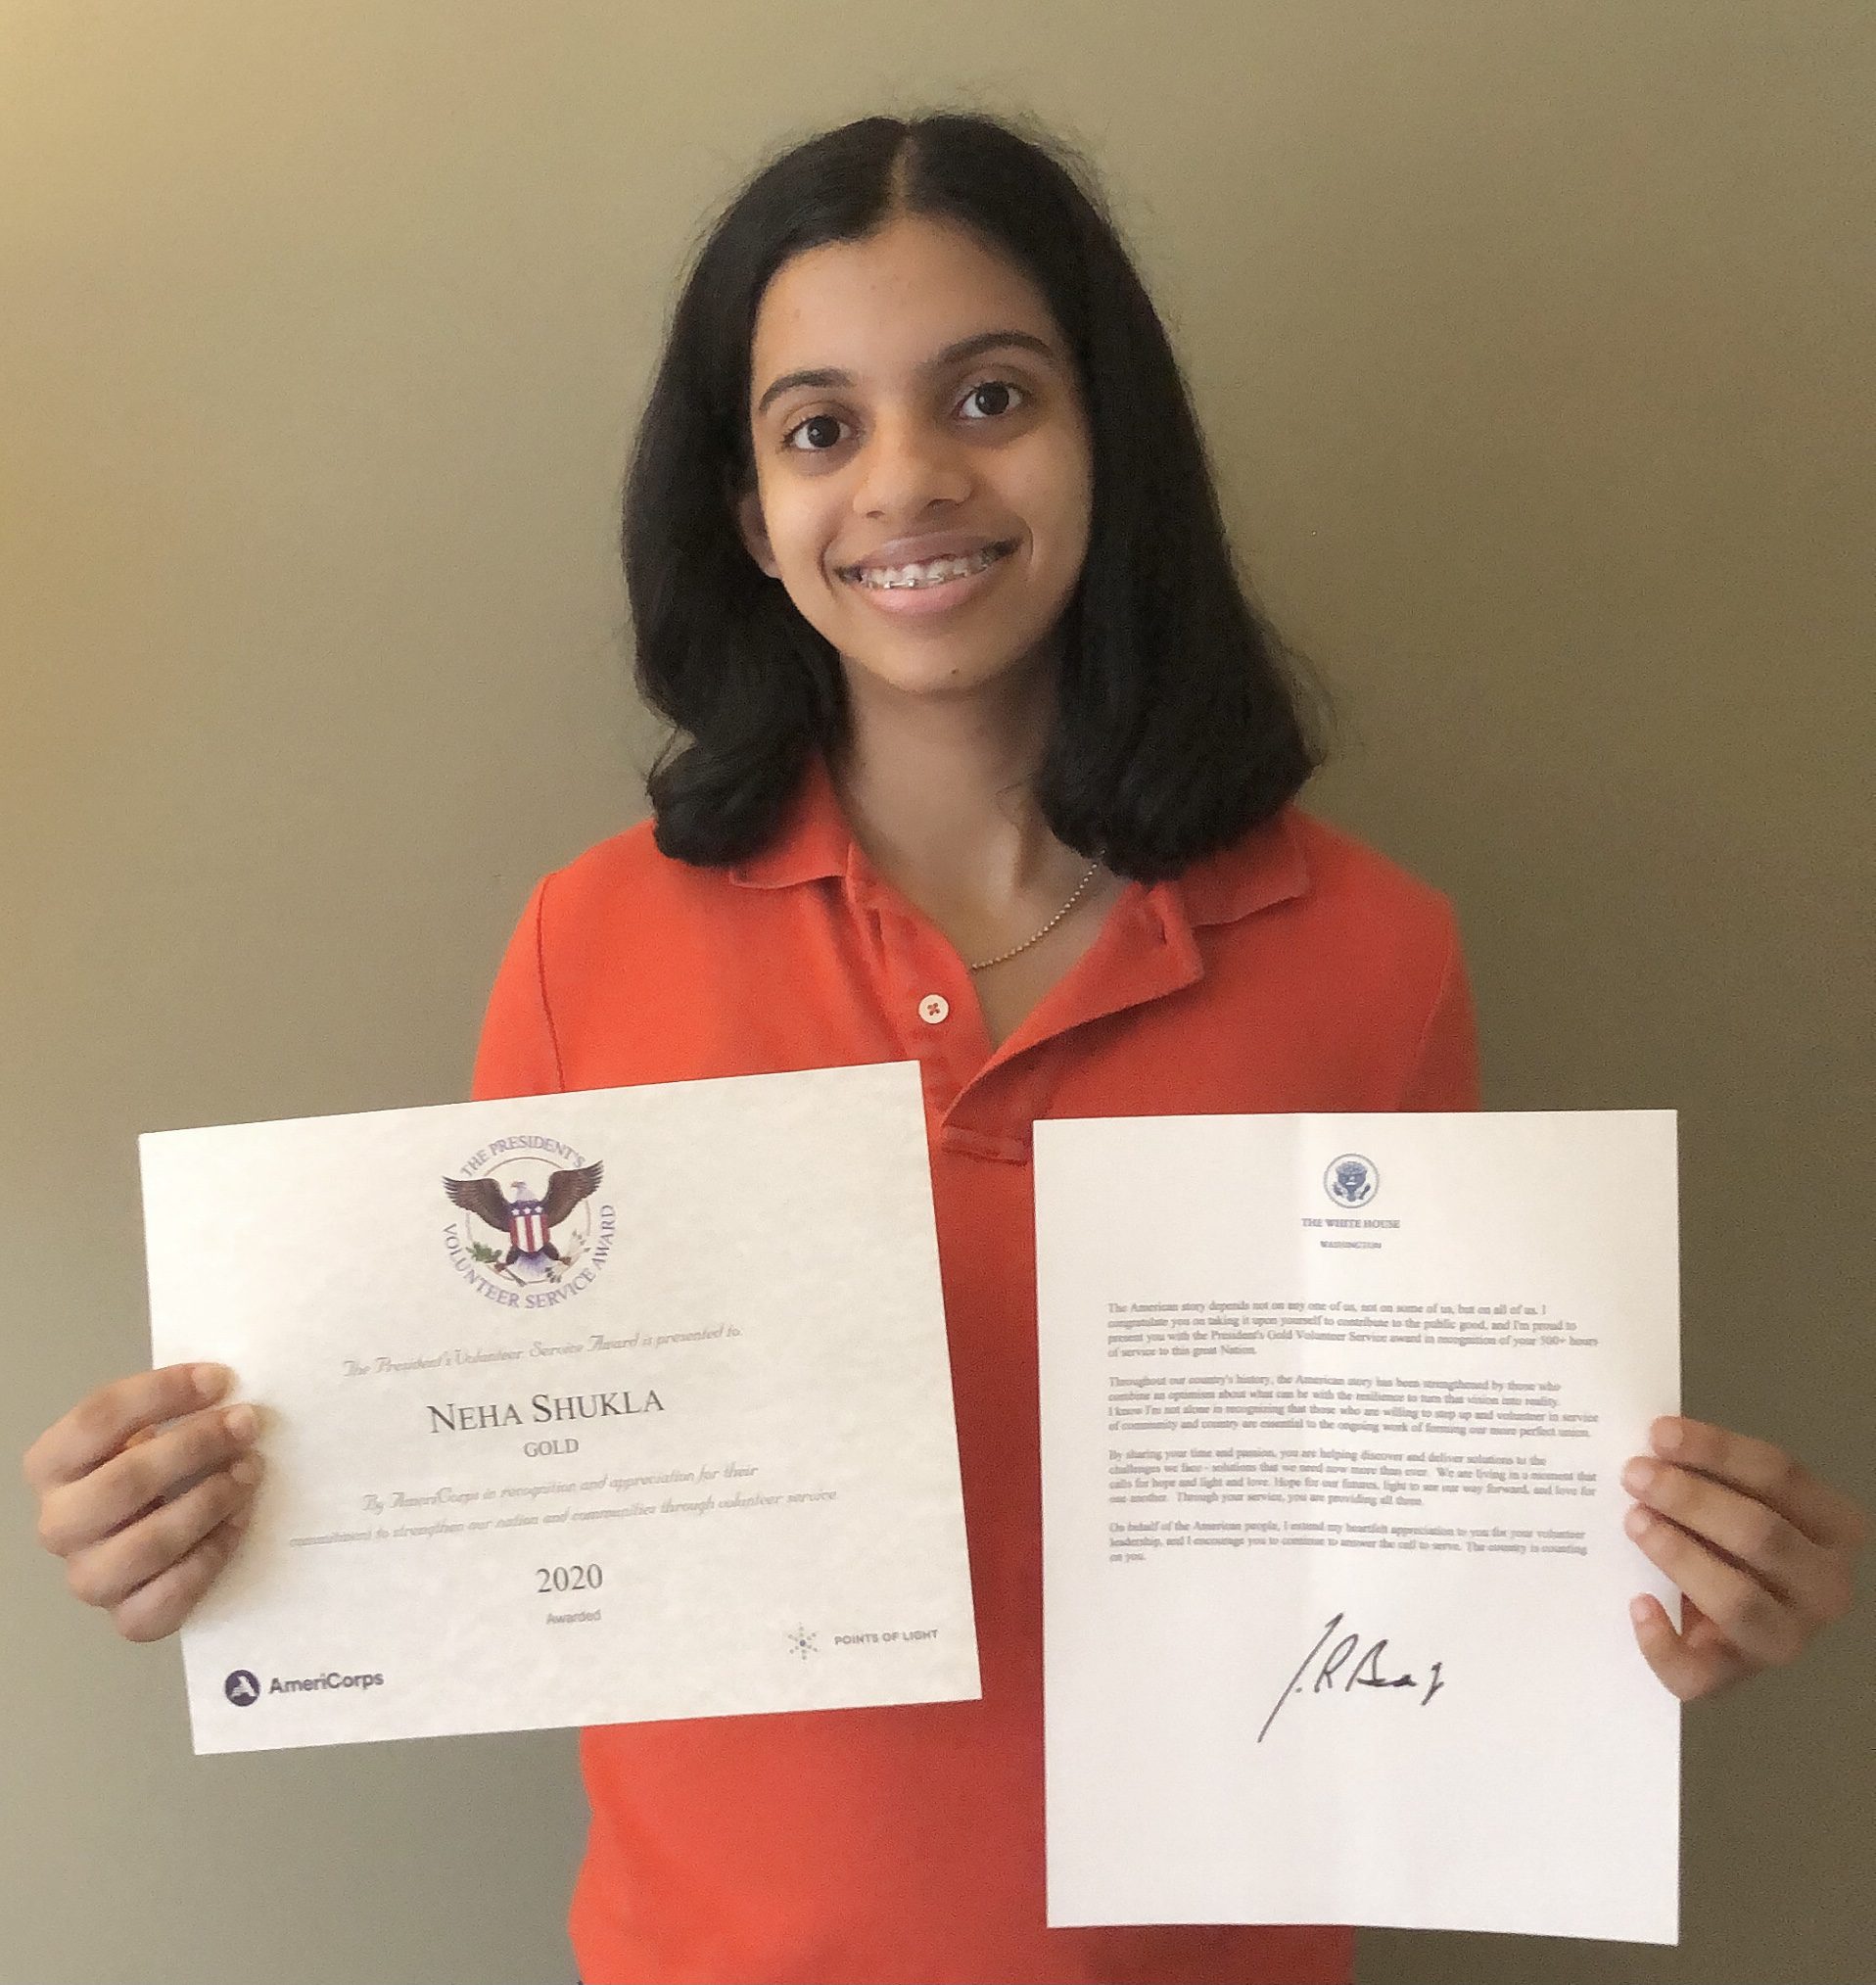 Meet Neha Shukla, the 16-year-old teen innovator, STEM whiz and recipient of the Diana Award in 2021 for her invention SixFeetApart.